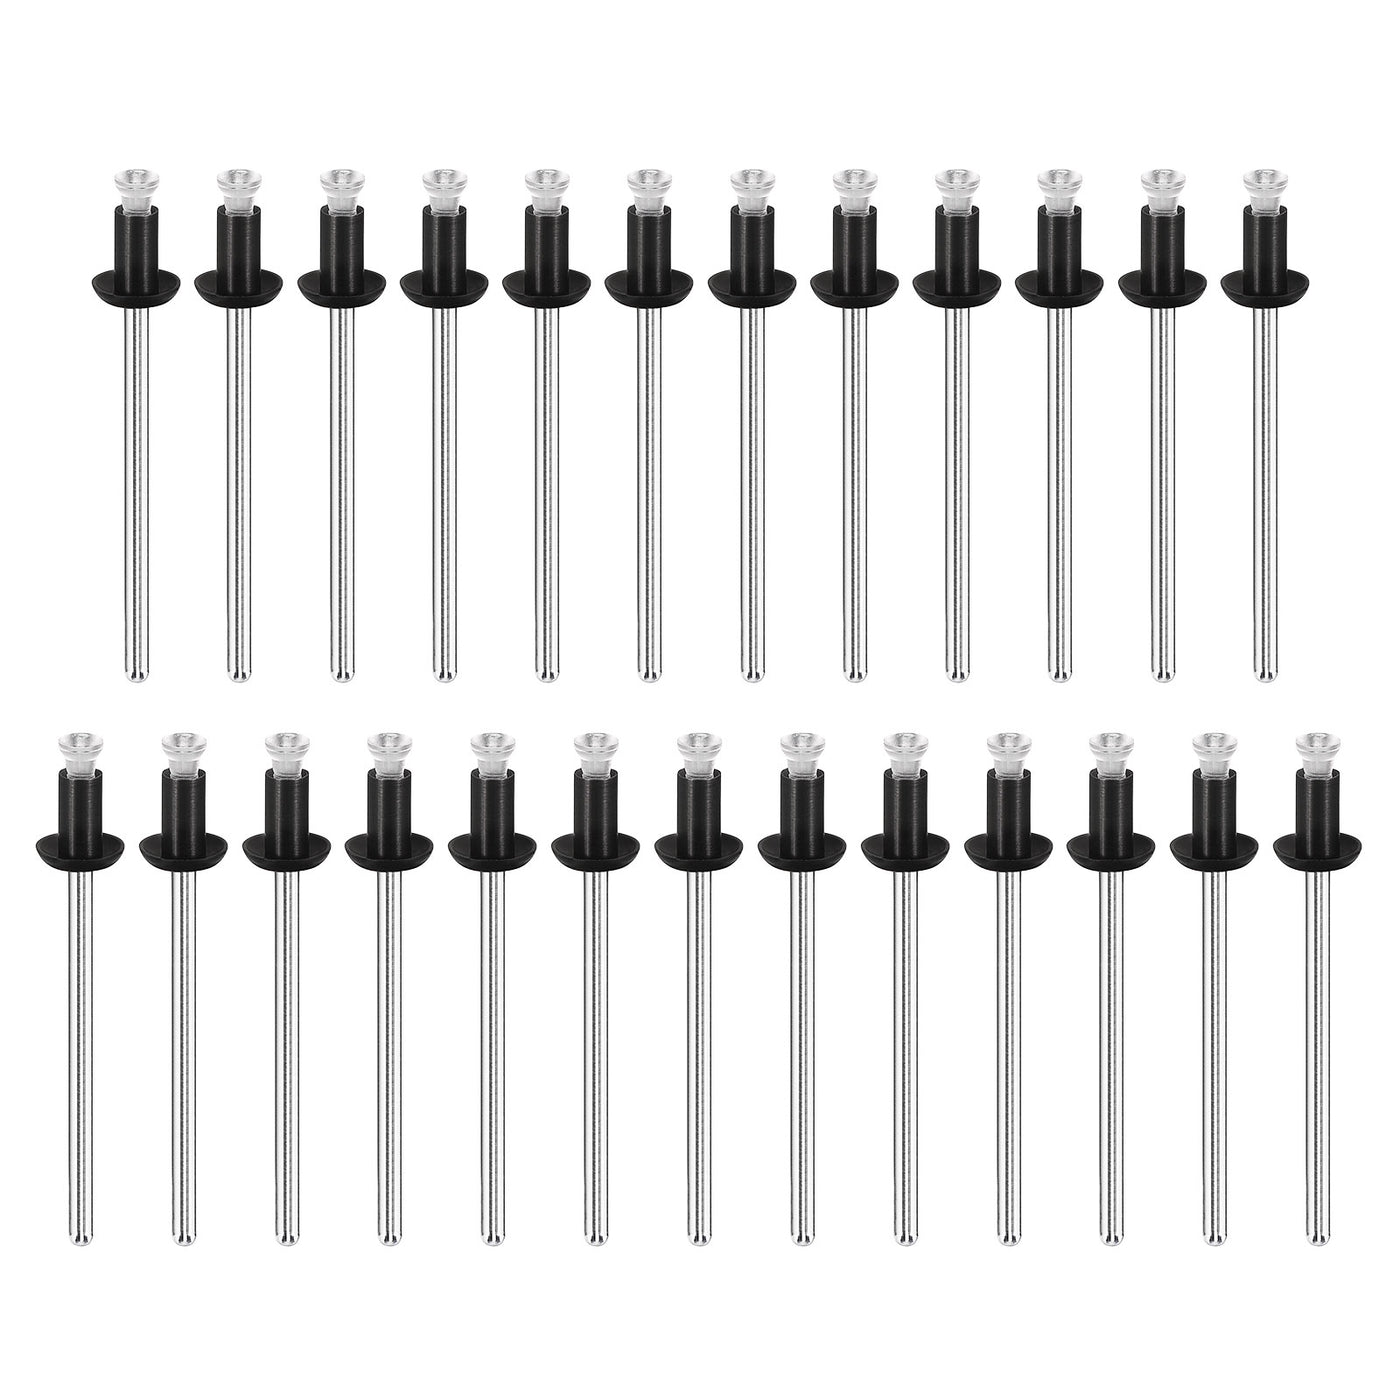 uxcell Uxcell 4mm x 6.4mm Nylon Blind Rivets for PC Board Bumper Trim Retainer, Black 50Pcs